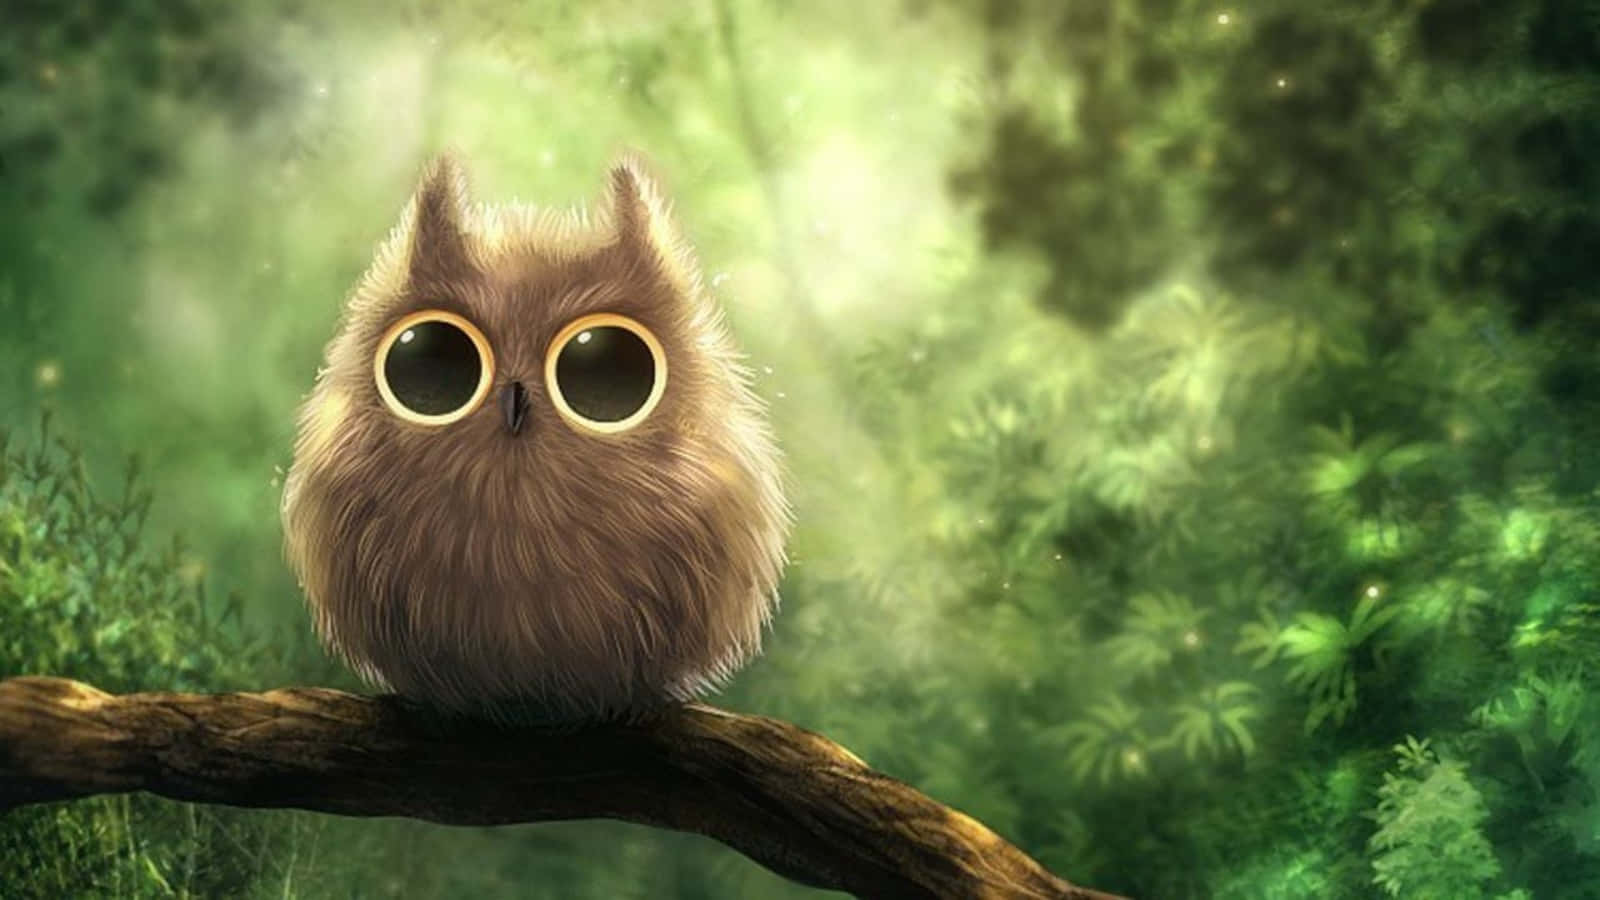 Funny Owl Cartoon In Forest Picture